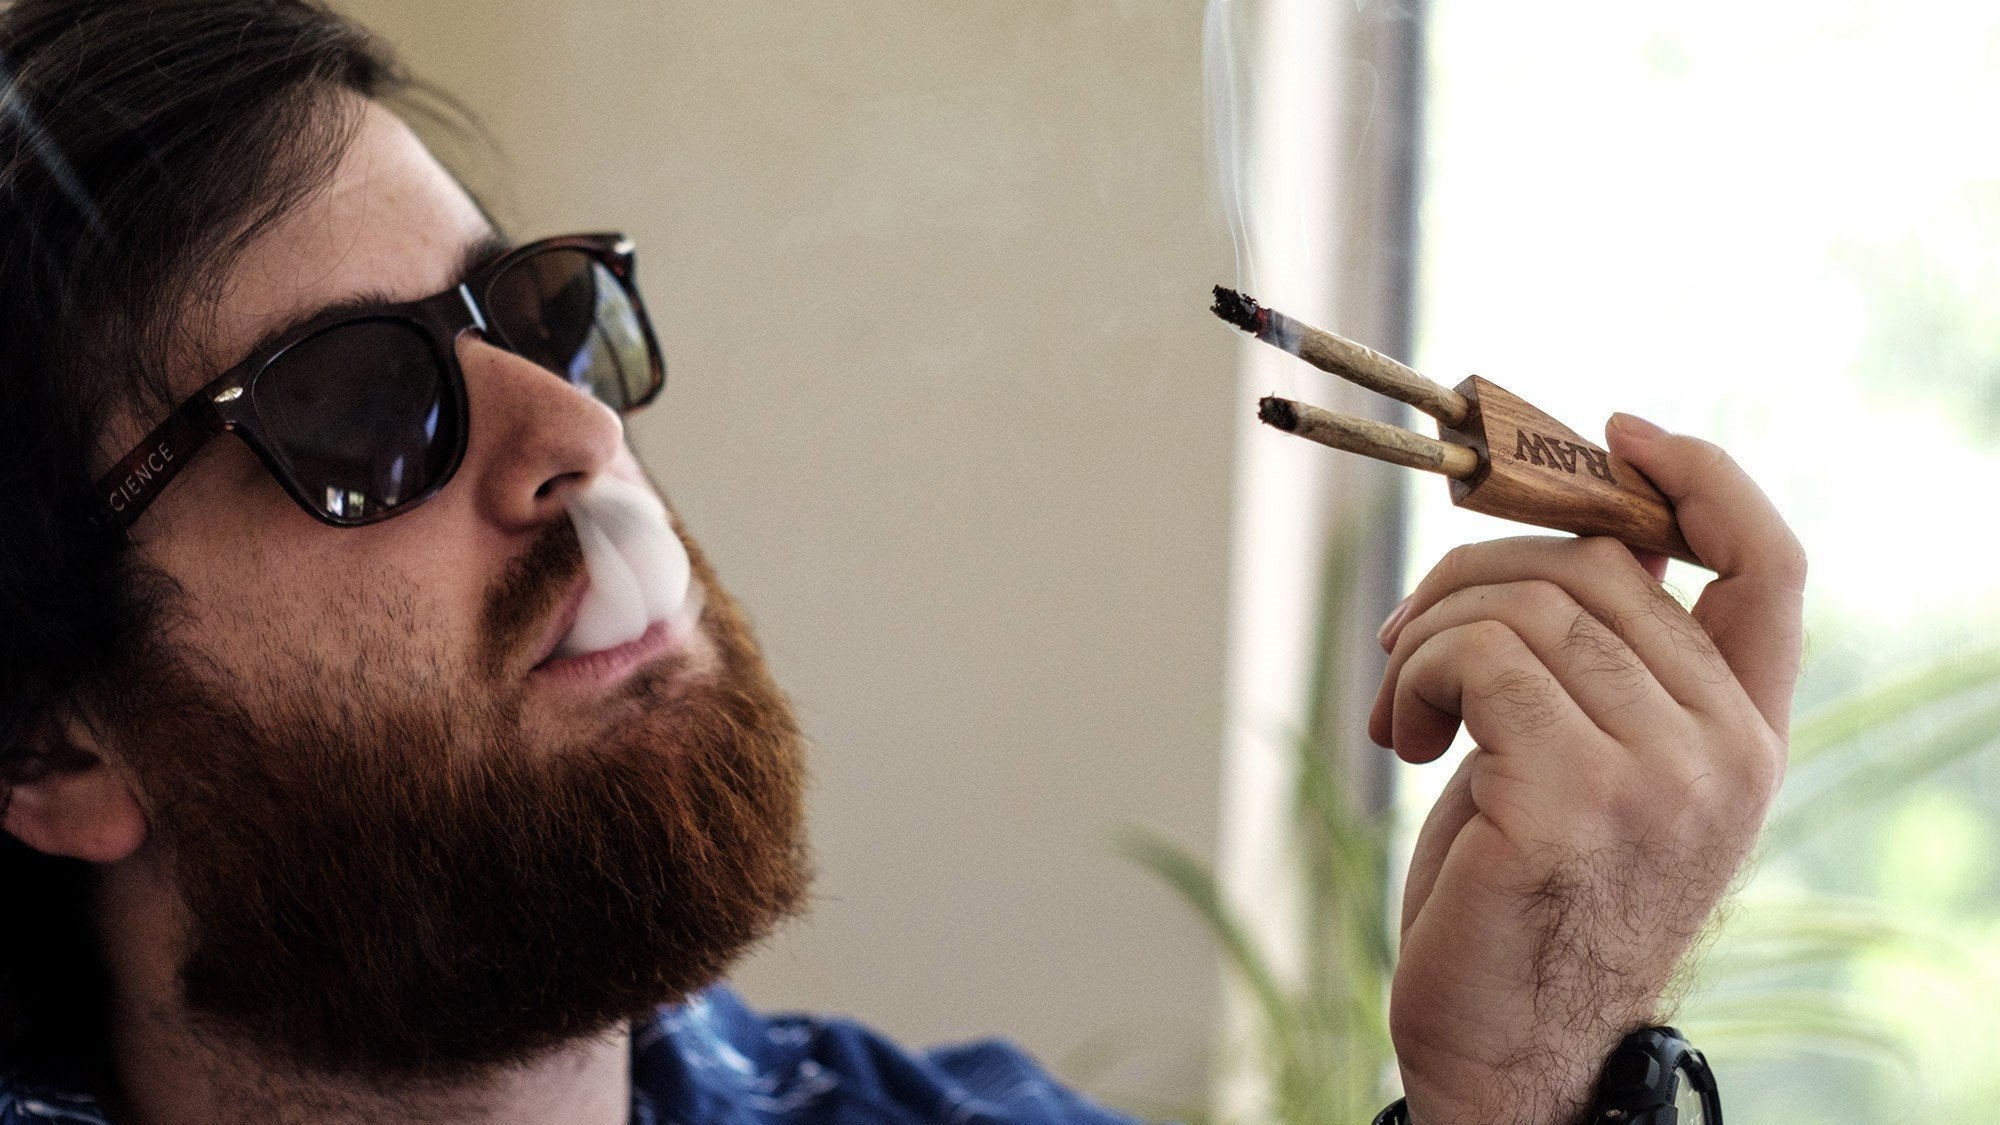 Cool Weed Accessories For Smoking, Getting High On 420